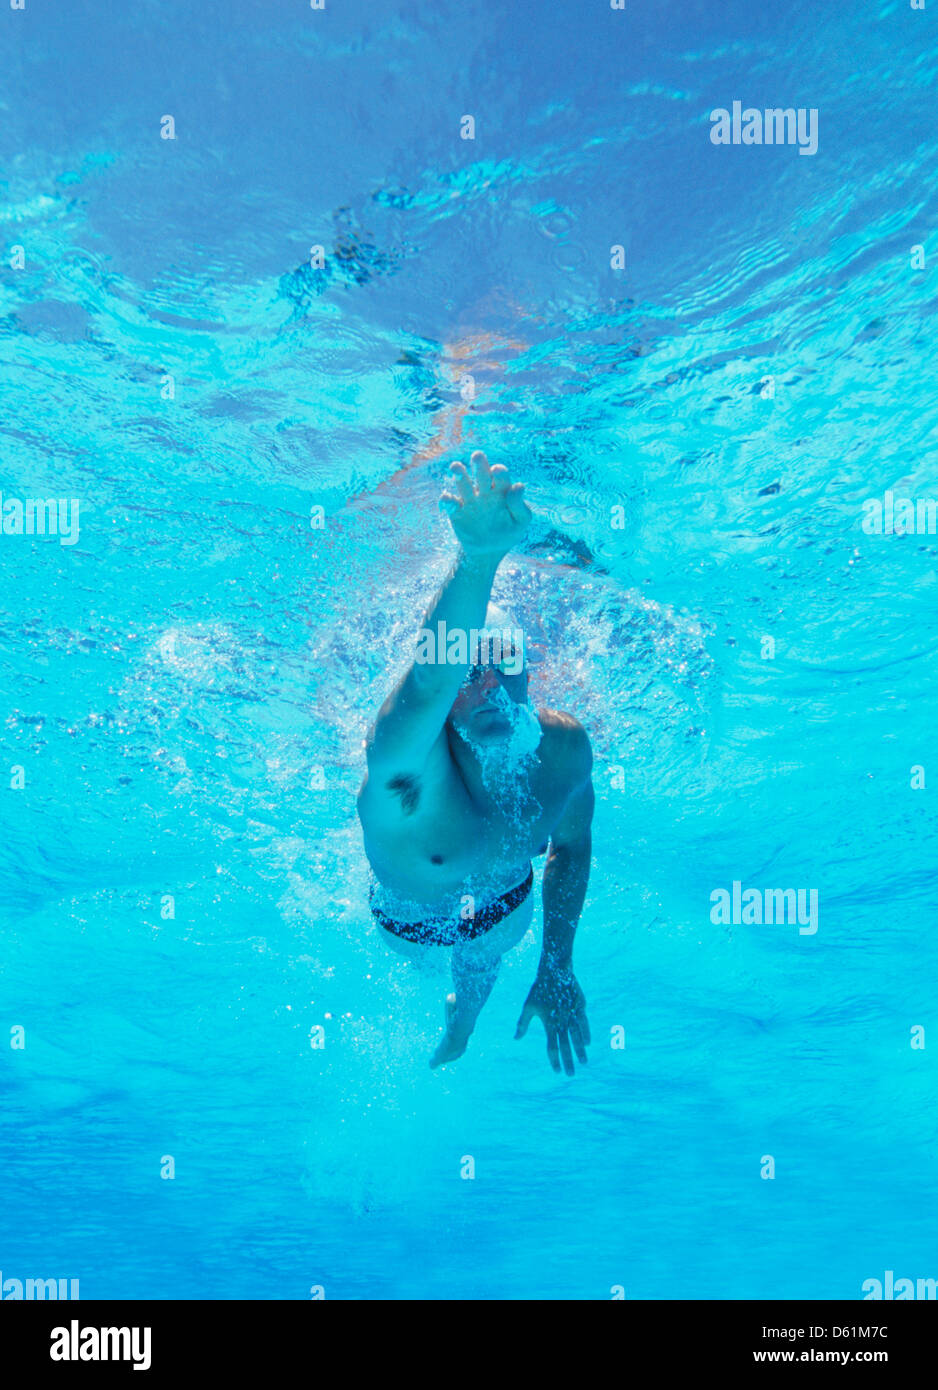 Underwater shot of professional male thlete swimming in pool Stock Photo